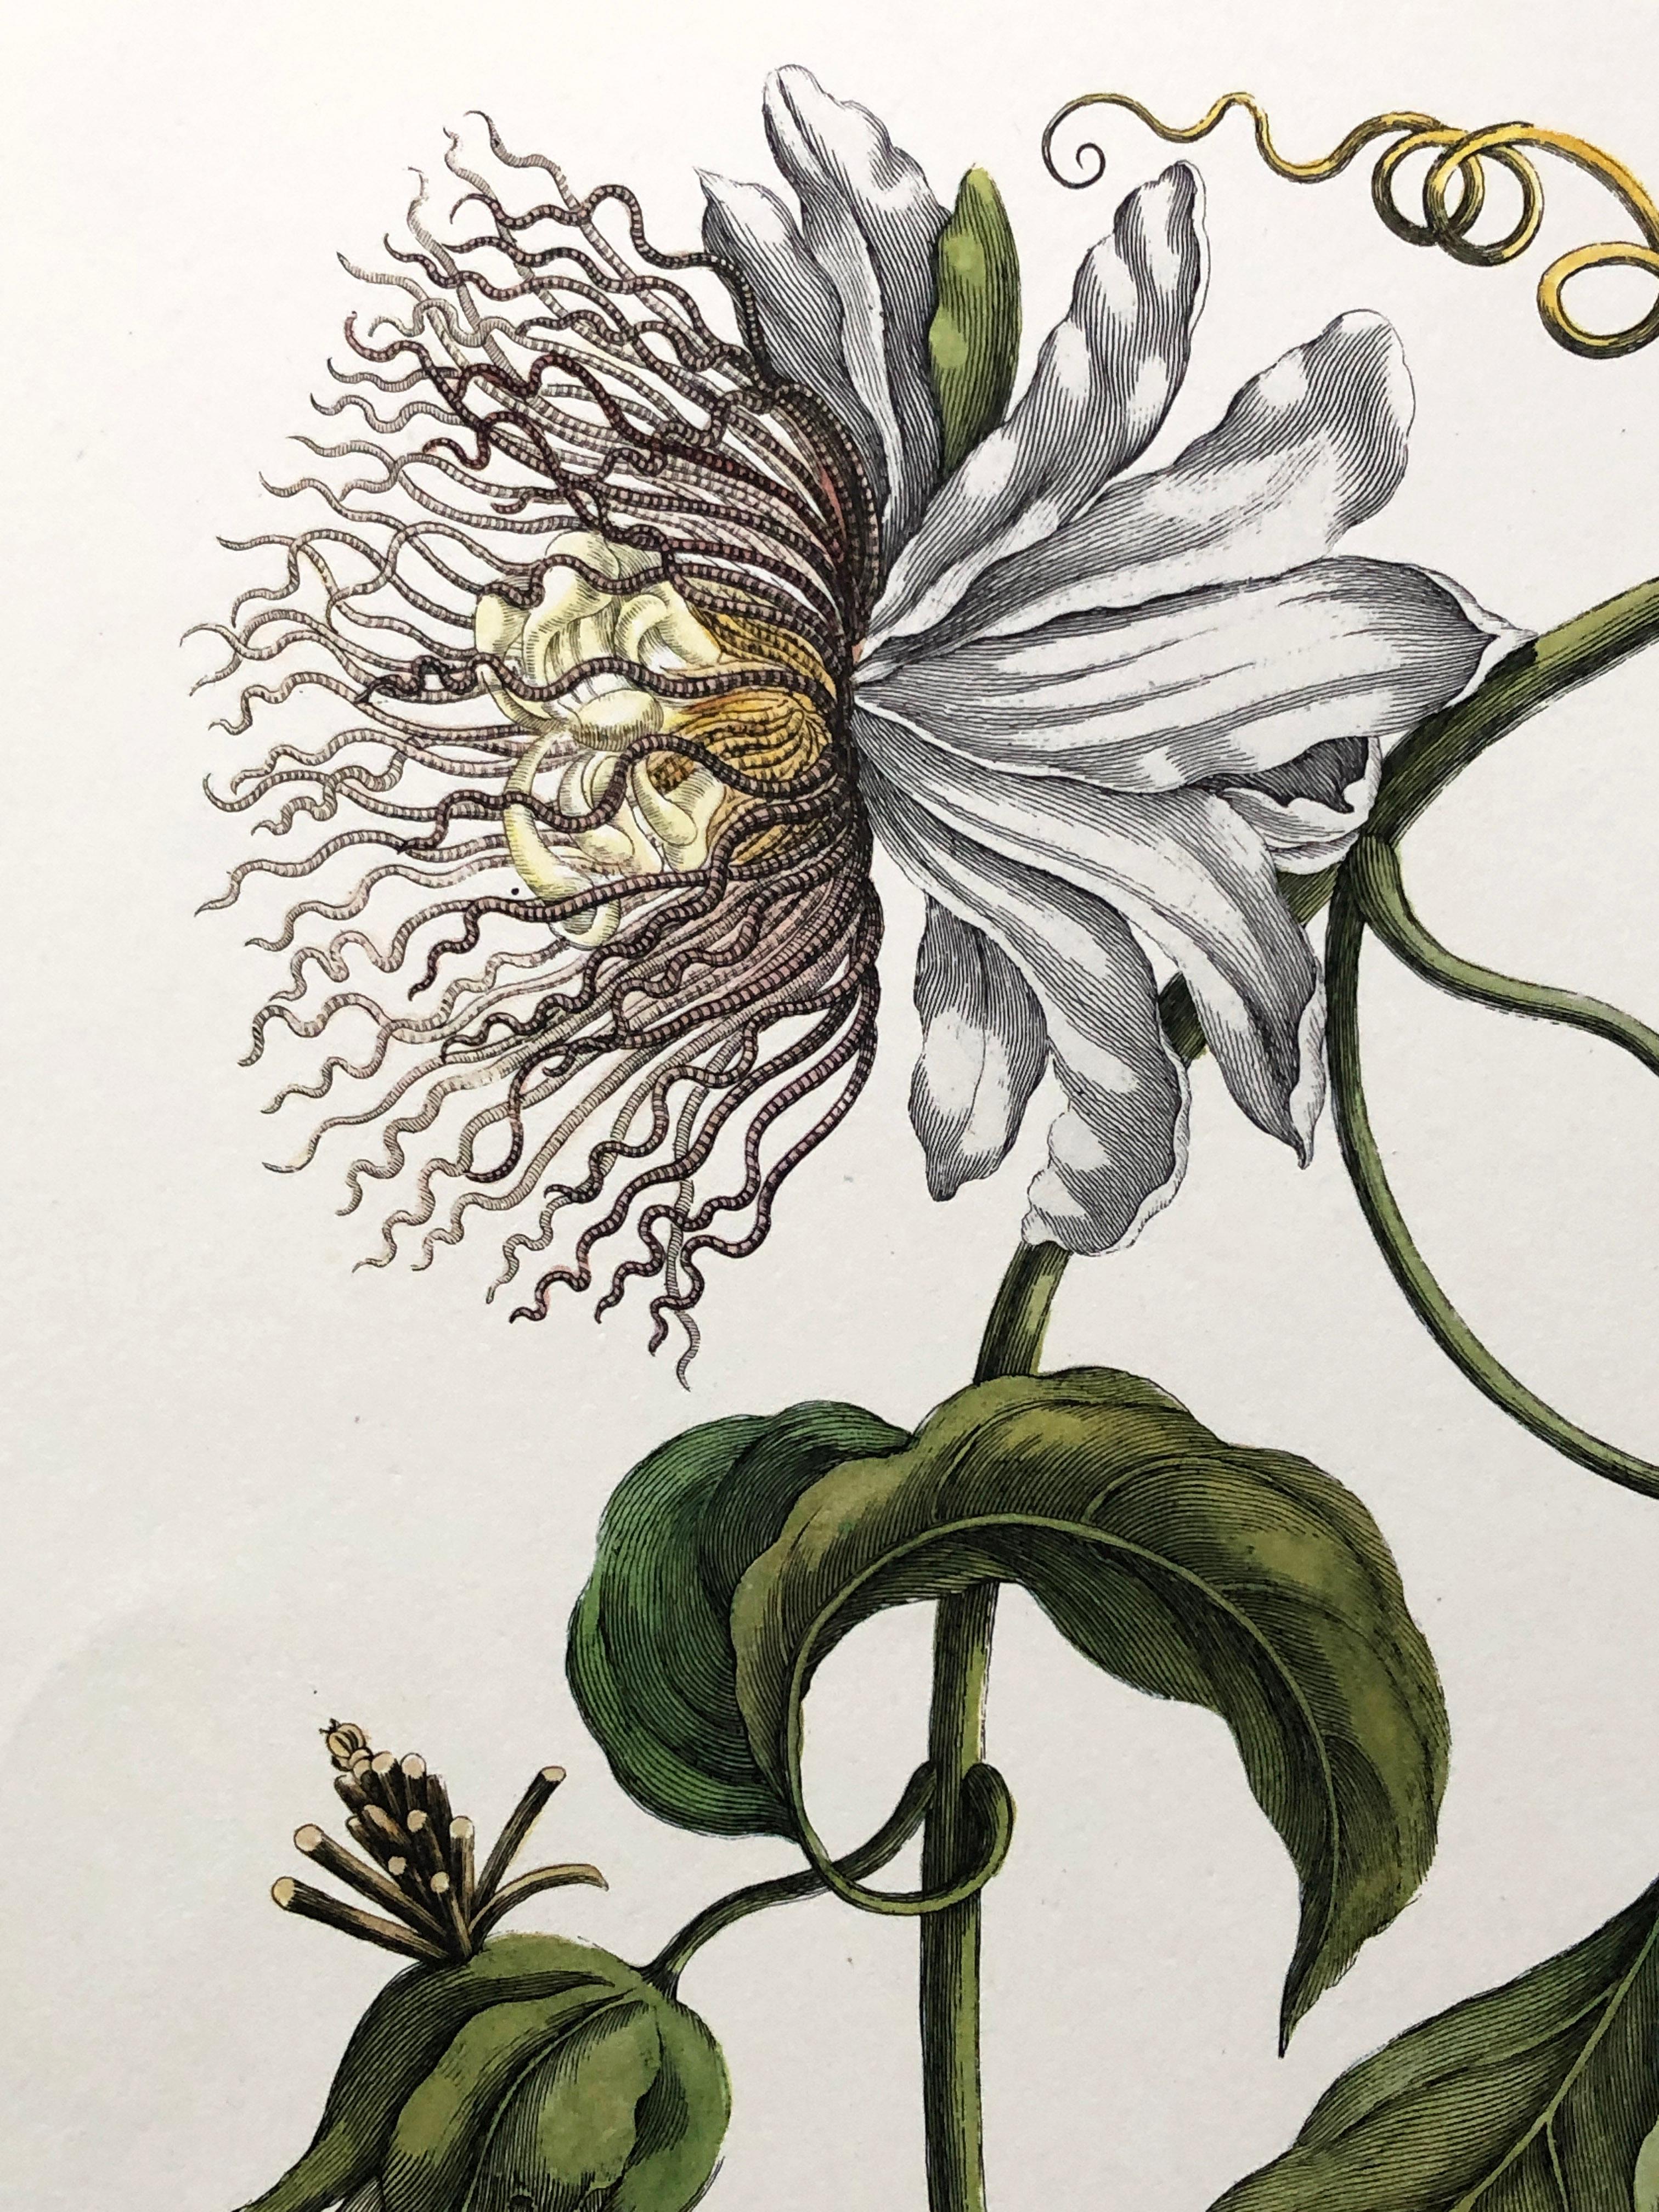 Other Maria Sibylla Merian - J. Mulder - Passionflower and insects Nr. 21 For Sale